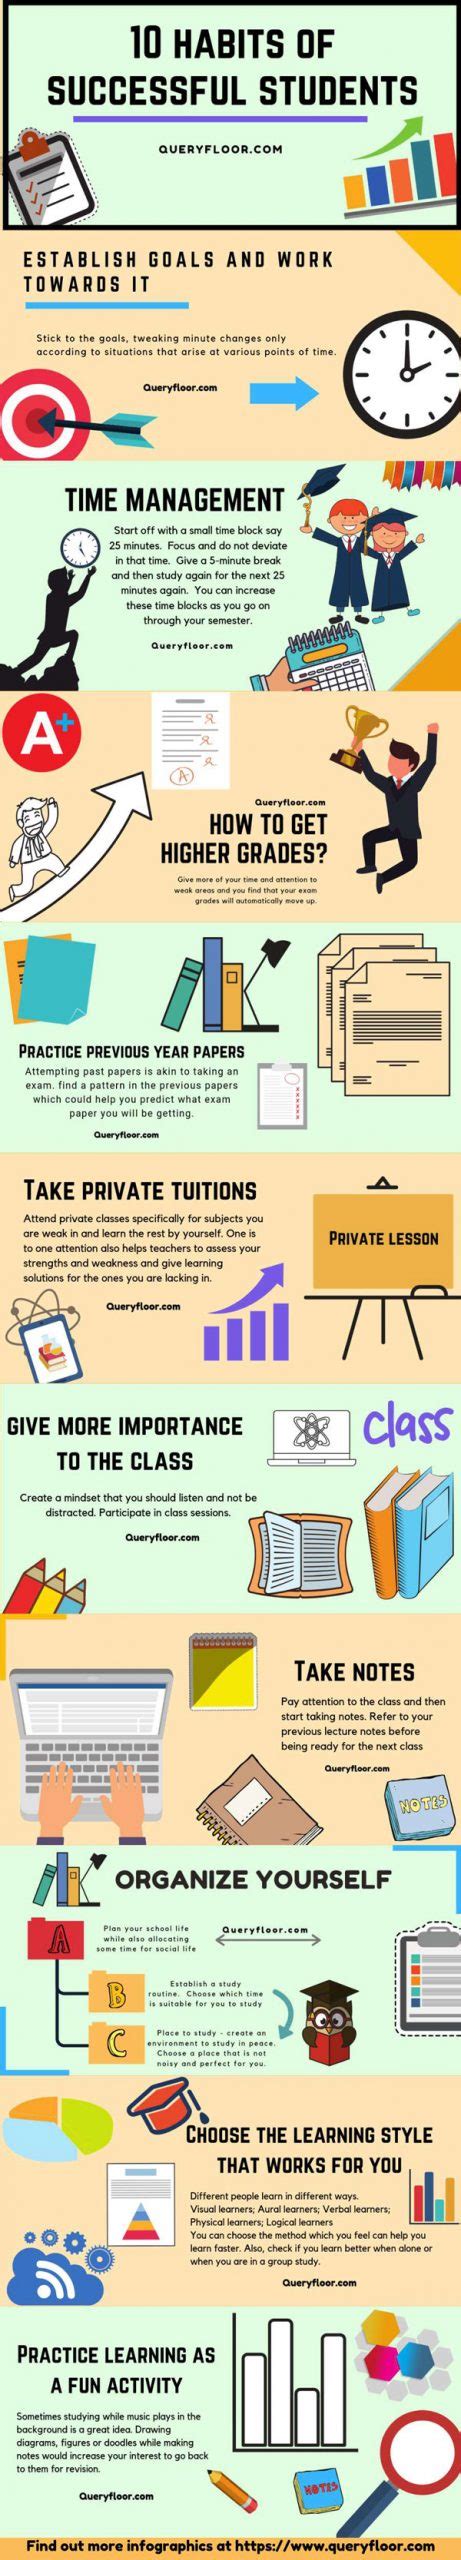 10 Habits of Successful Students [Infographic] - Best Infographics